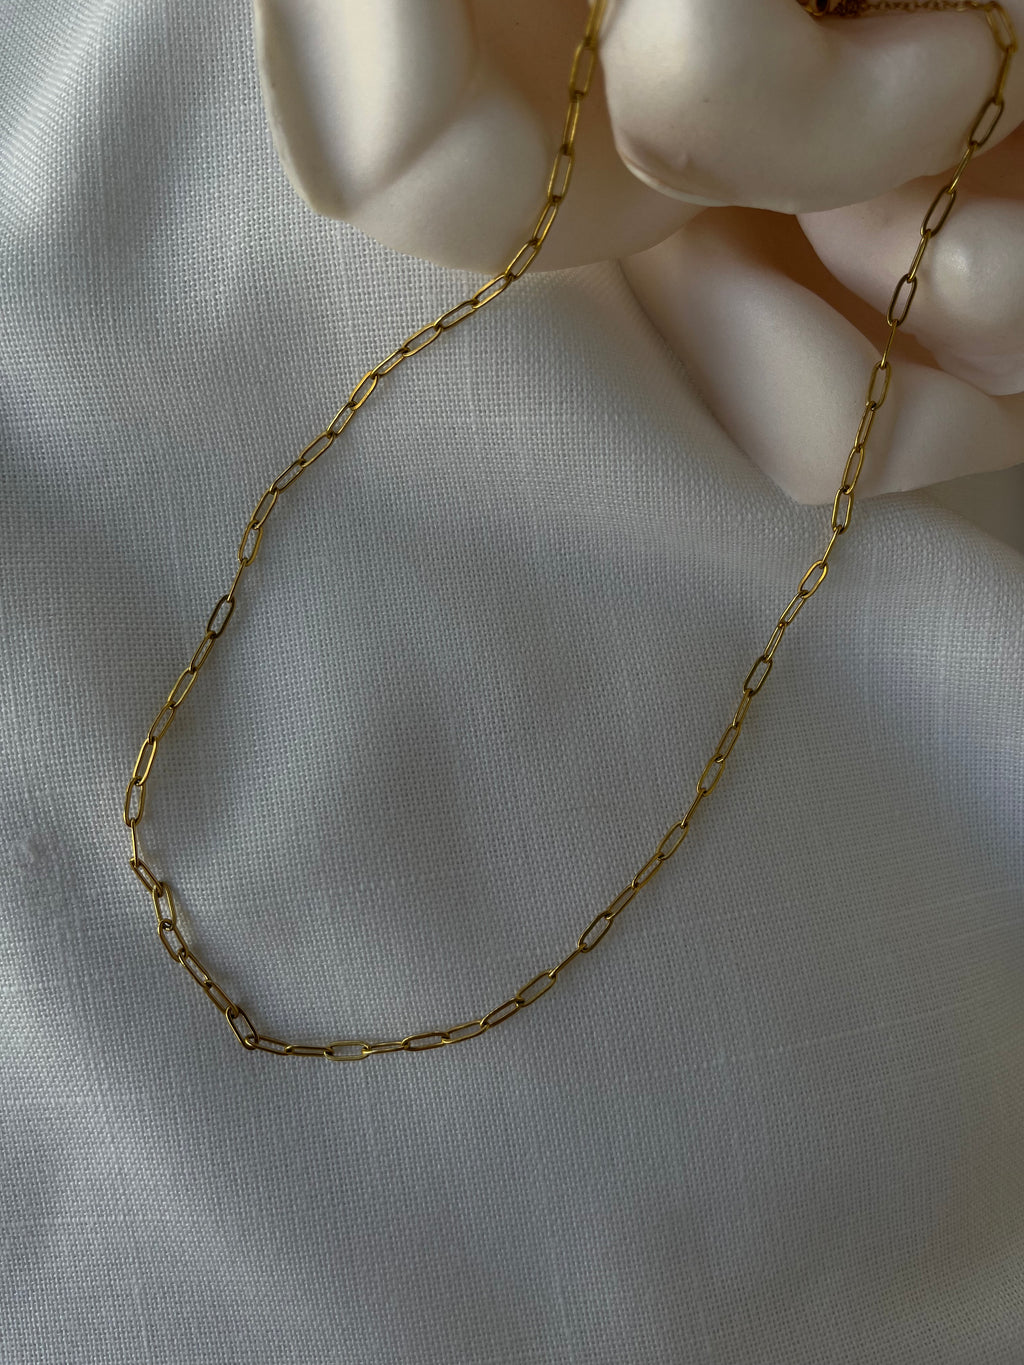 gold thin link chain necklace